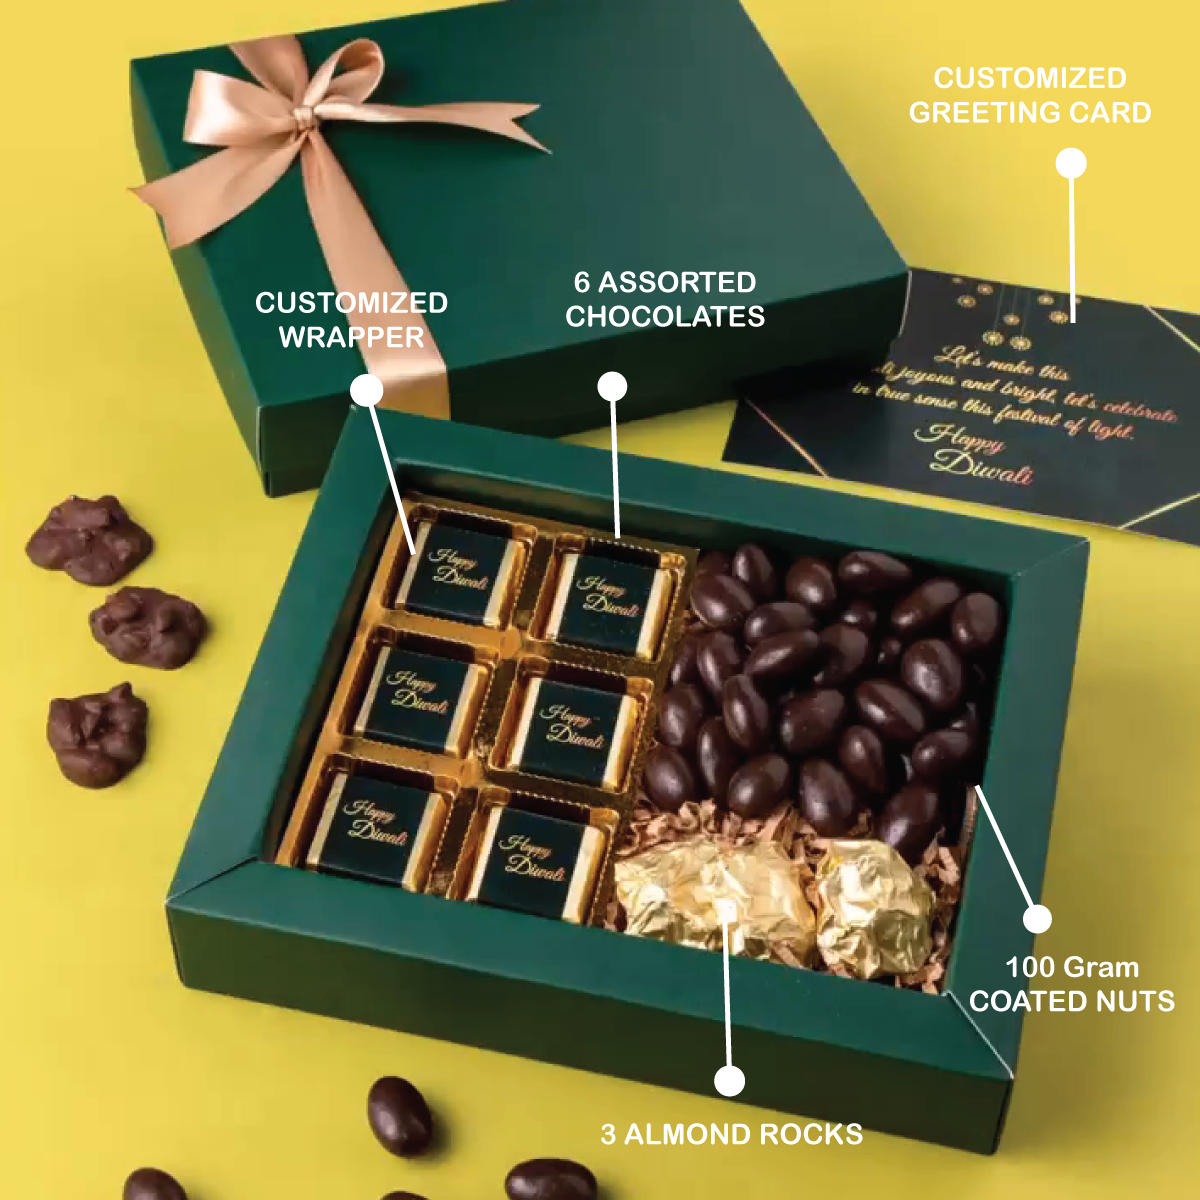 Customized Chocolate Wrapper with Greeting Message Chocolate, Nuts, and Sweet Combo Gift Set - For Employees, Dealers, Customers, Stakeholders, Personal or Corporate Diwali Gifting CV11